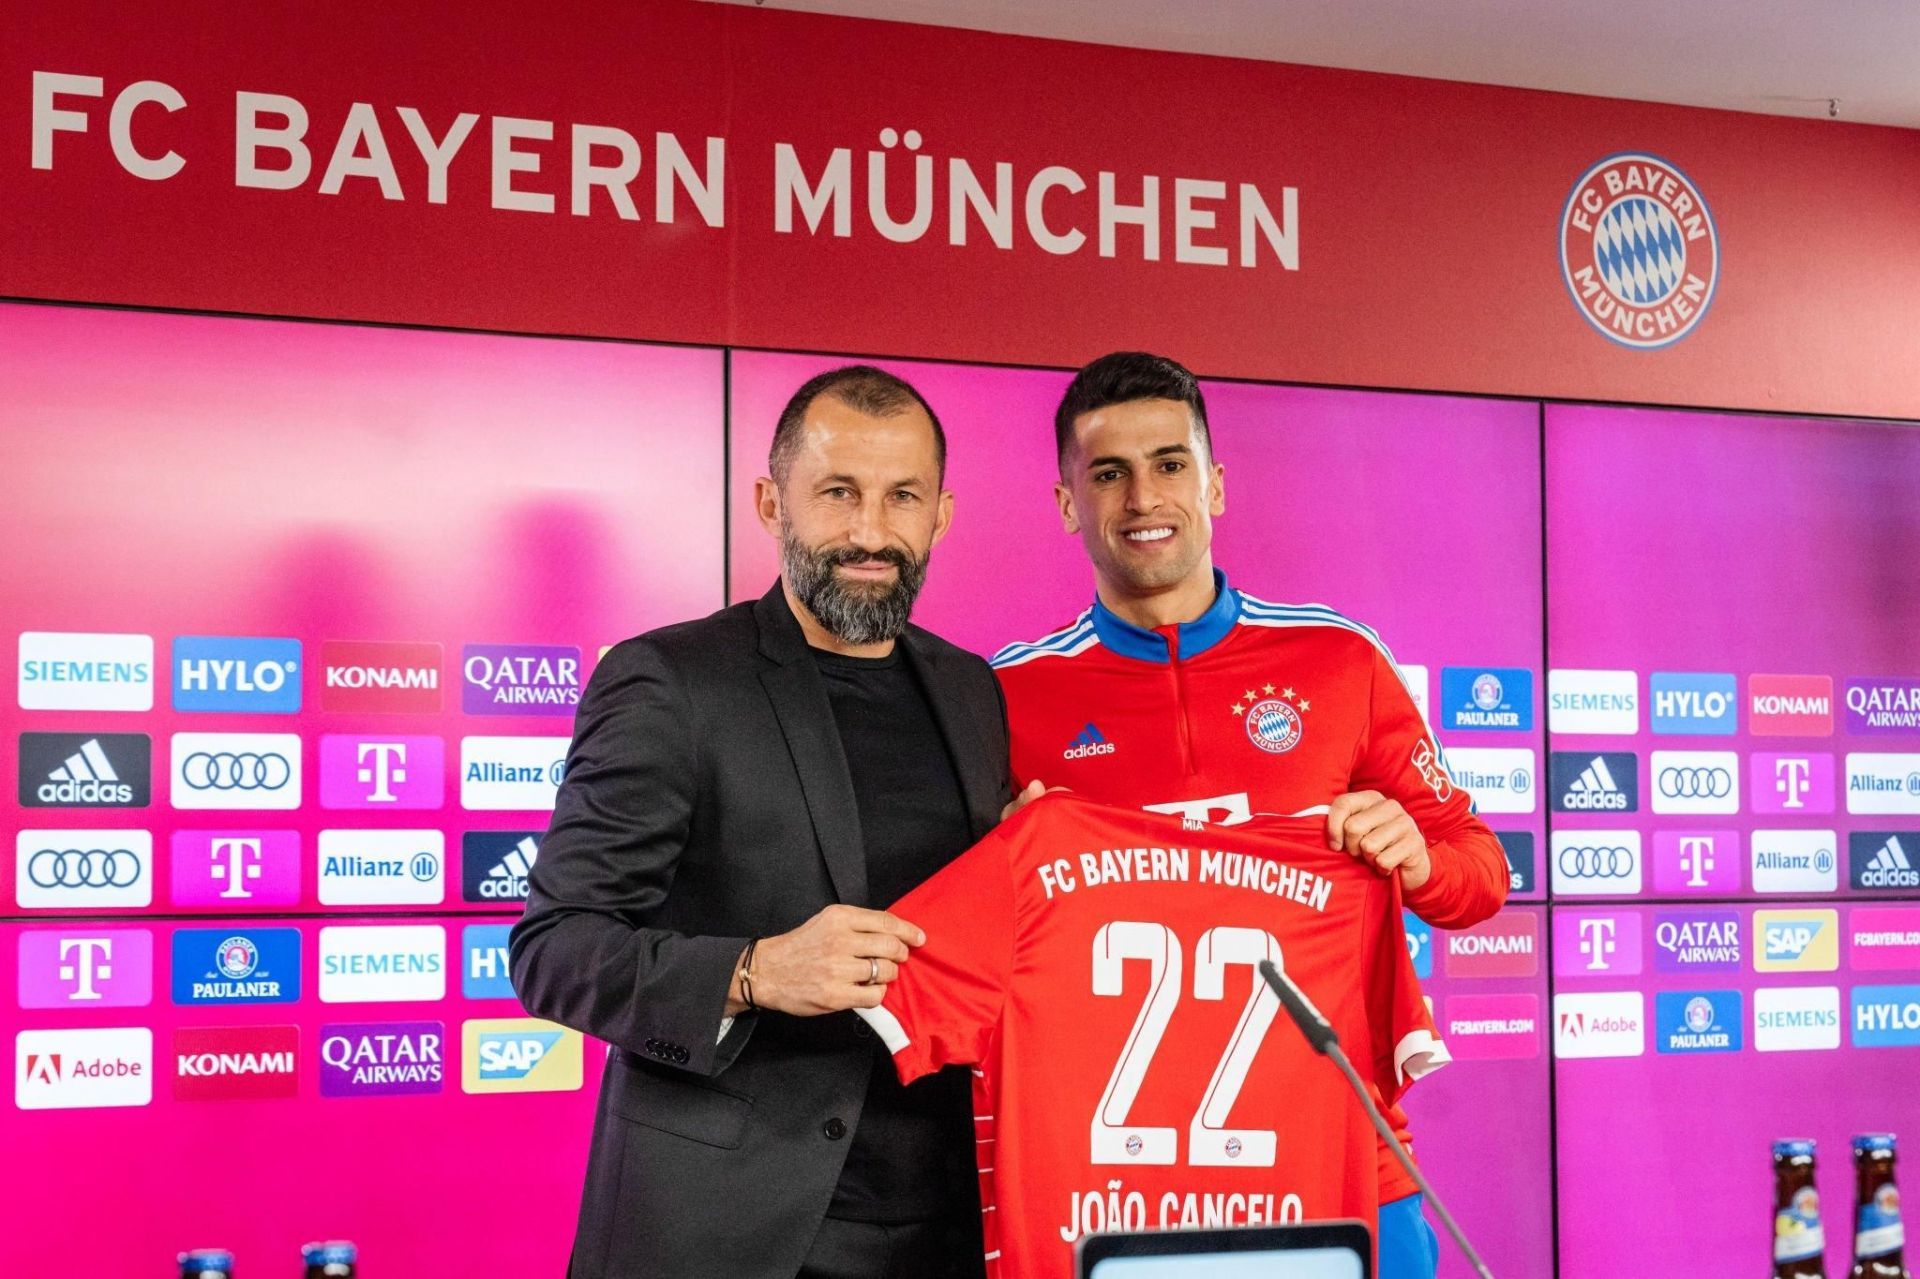 Joao Cancelo has swapped Manchester City for Bayern Munich following a lack of game time